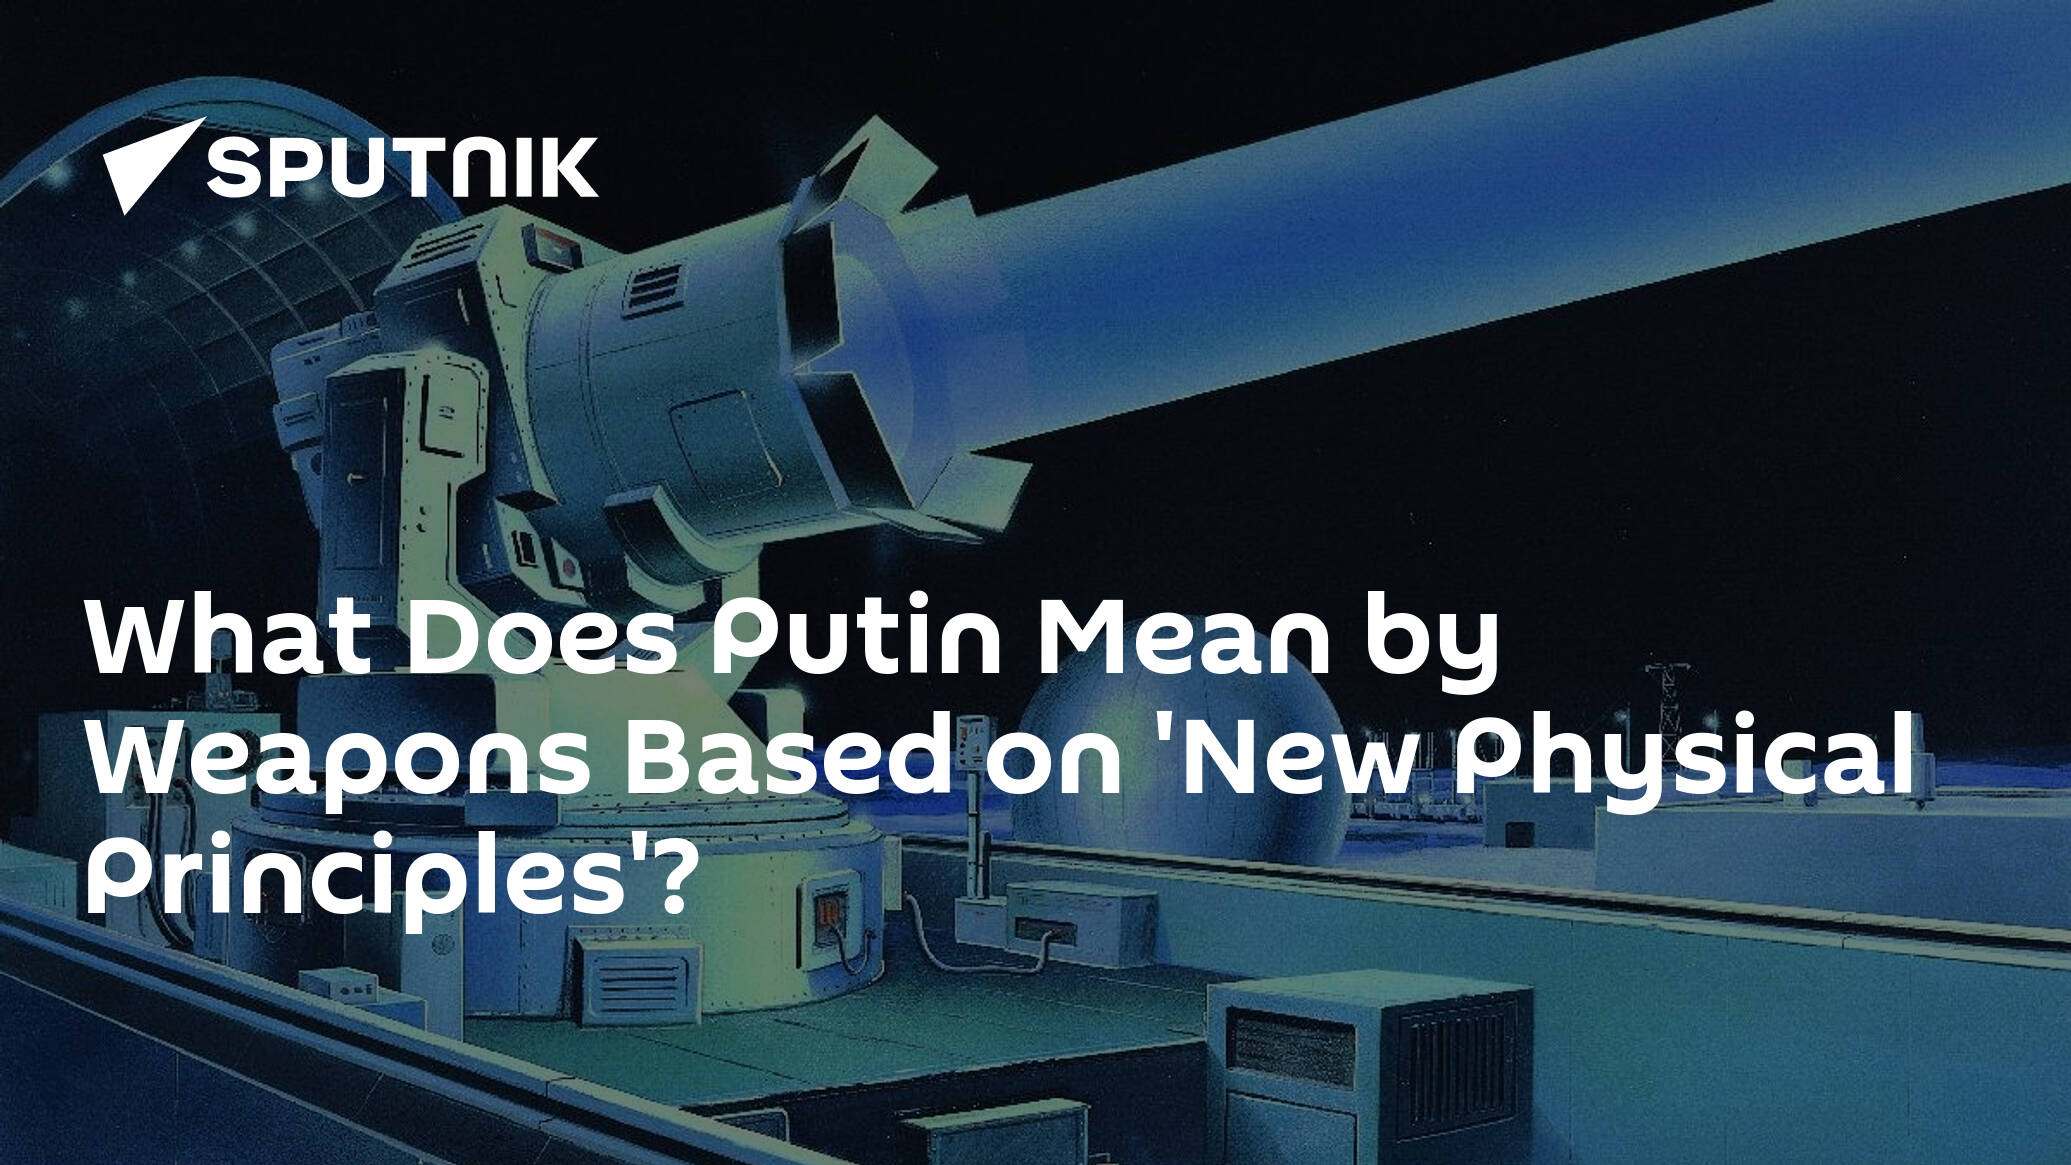 What Does Putin Mean by Weapons Based on 'New Physical Principles'?